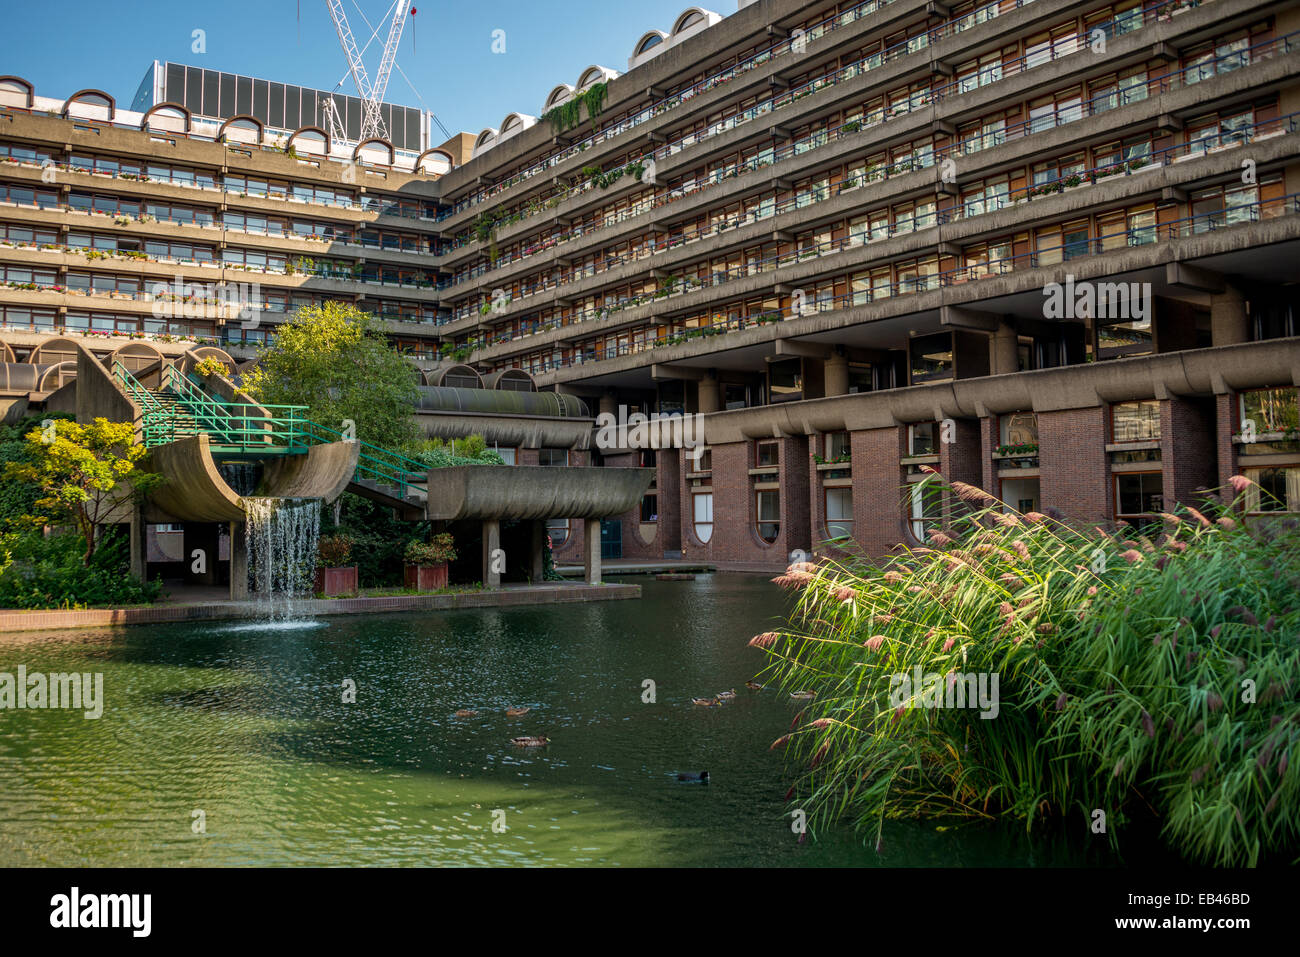 The Barbican Estate is a residential estate built during the 1960s and the 1970s in the City of London, in an area once devastat Stock Photo